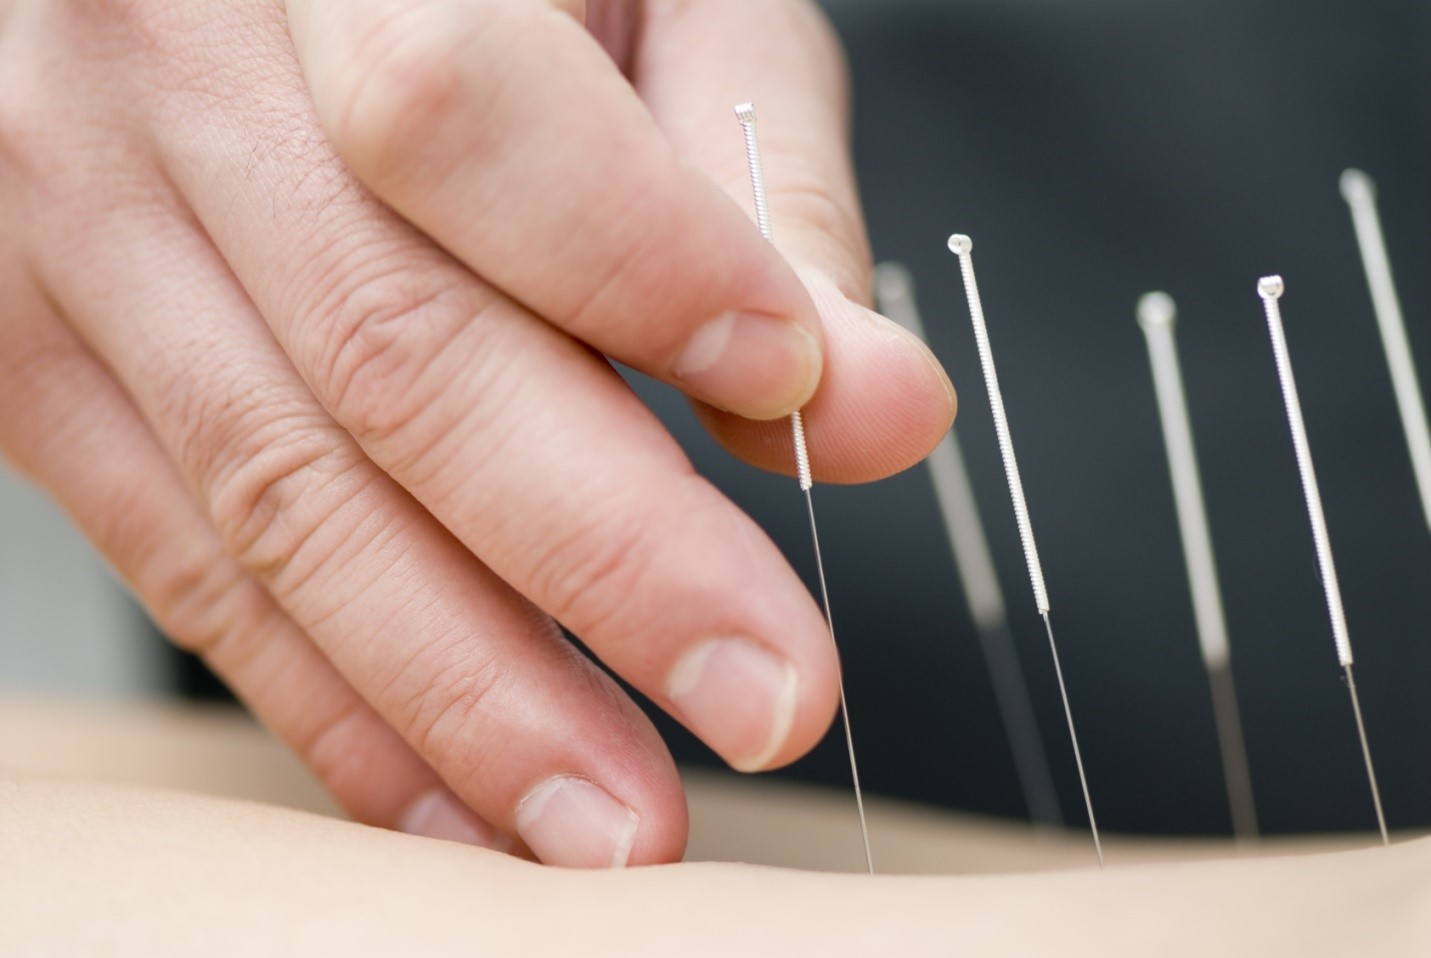 How Acupuncture Works and Why